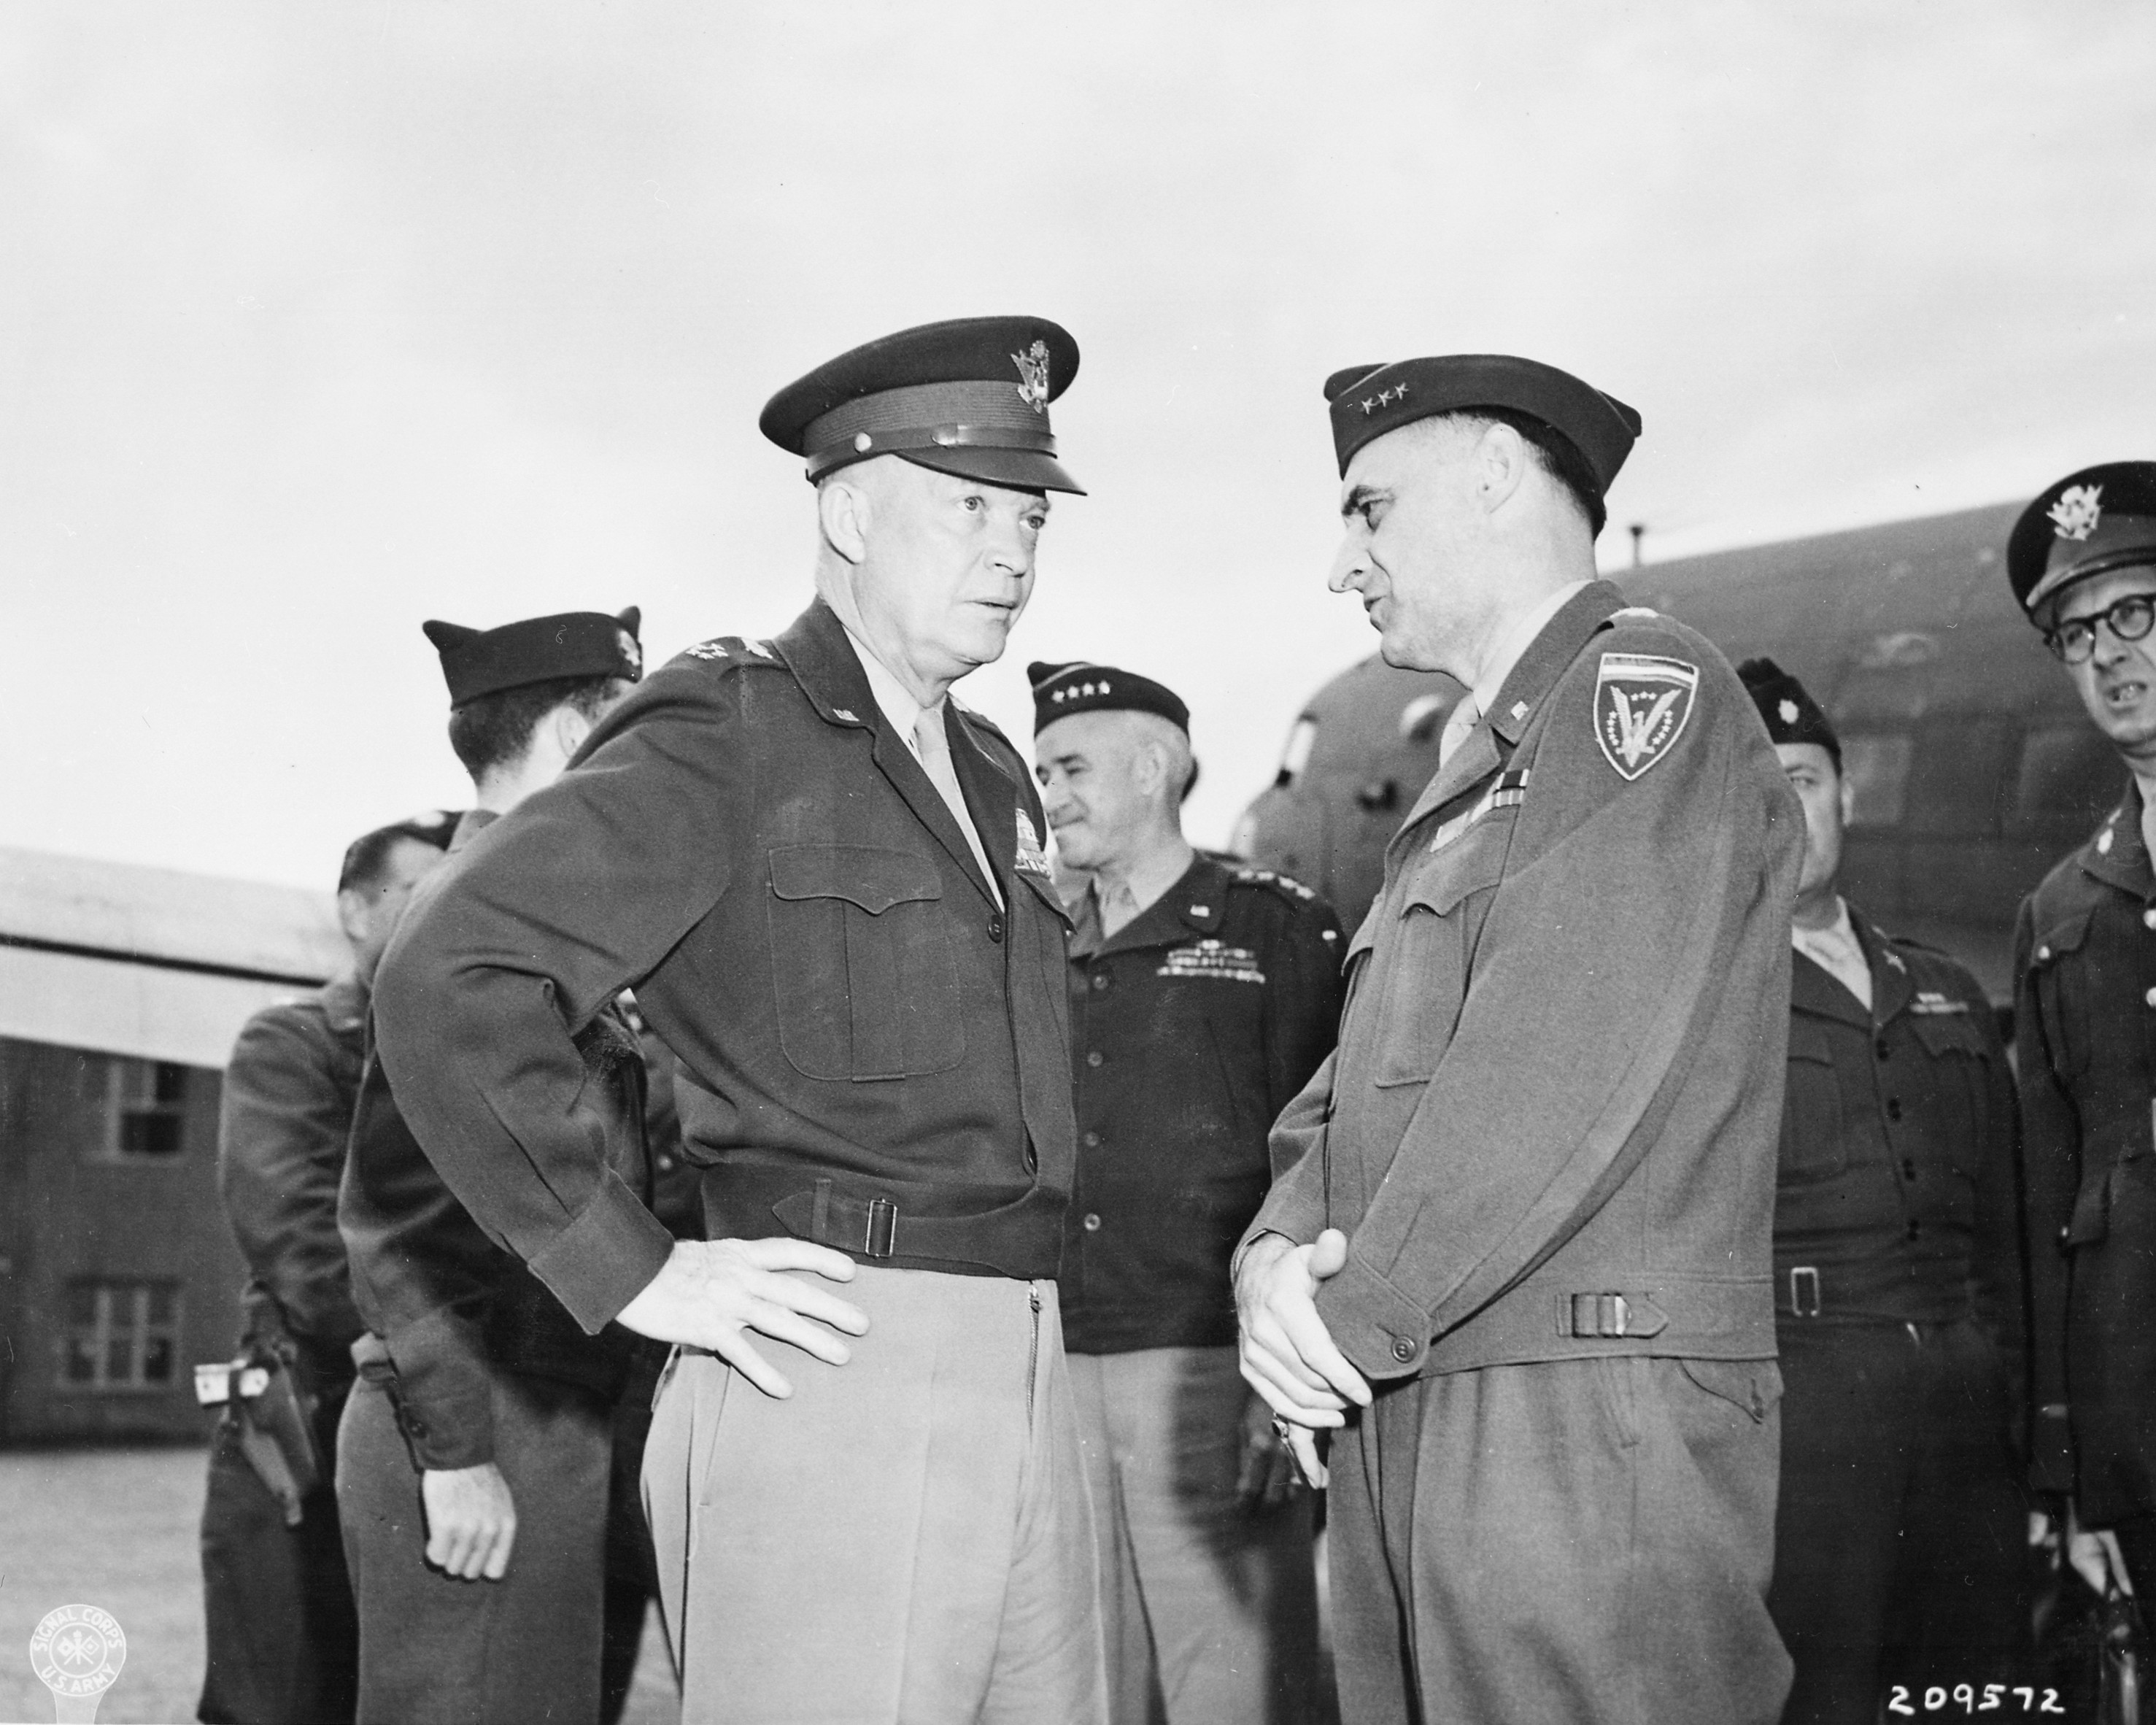 Dwight Eisenhower and Lucius Clay at the airfield in Gatow, Berlin, Germany, 20 Jul 1945; note Omar Bradley in background